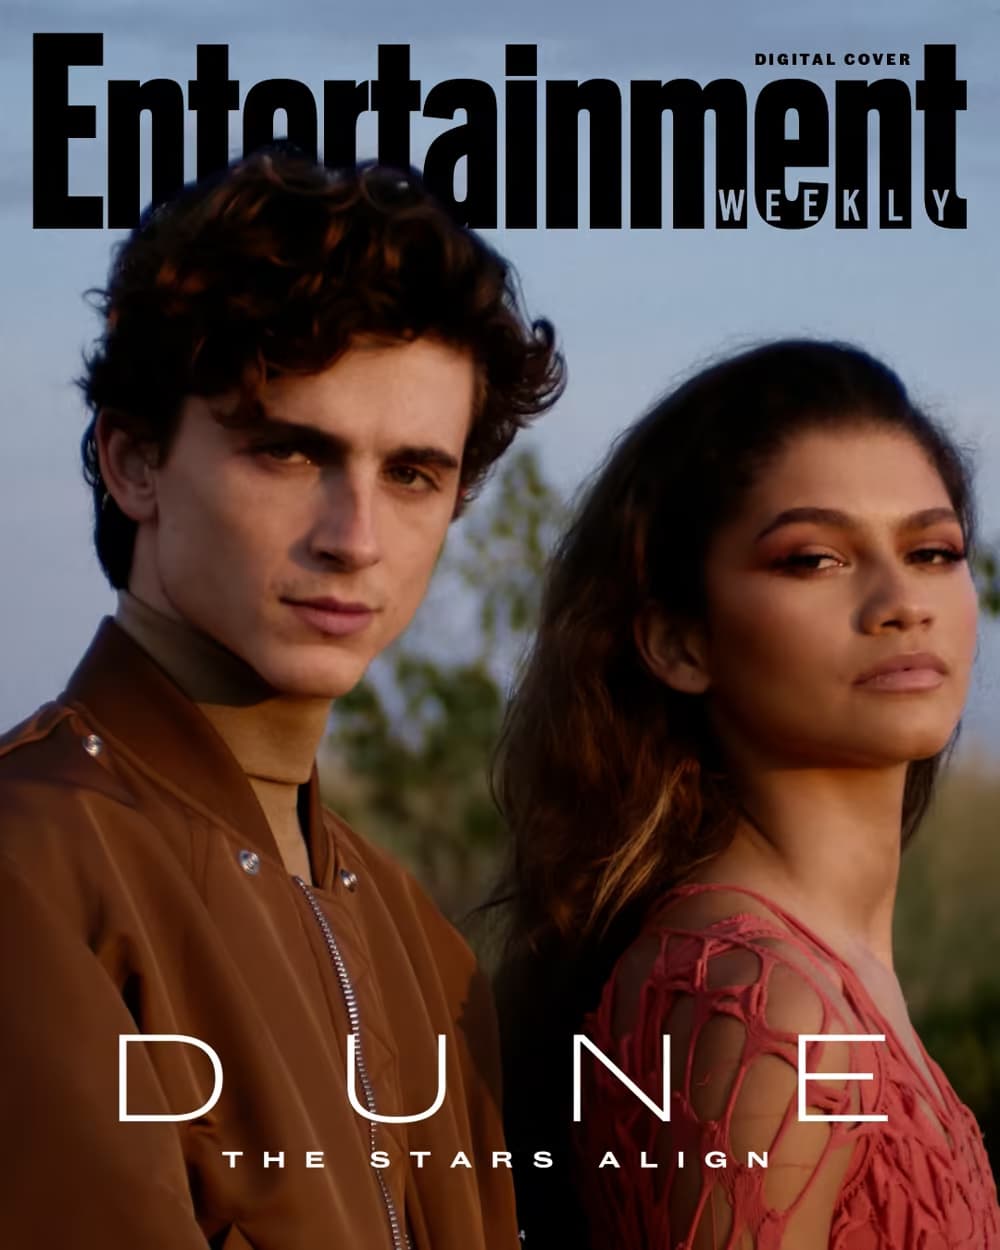 Entertainment Weekly's digital cover shows Timothée Hal Chalamet looking much taller than his Dune co-star Zendaya